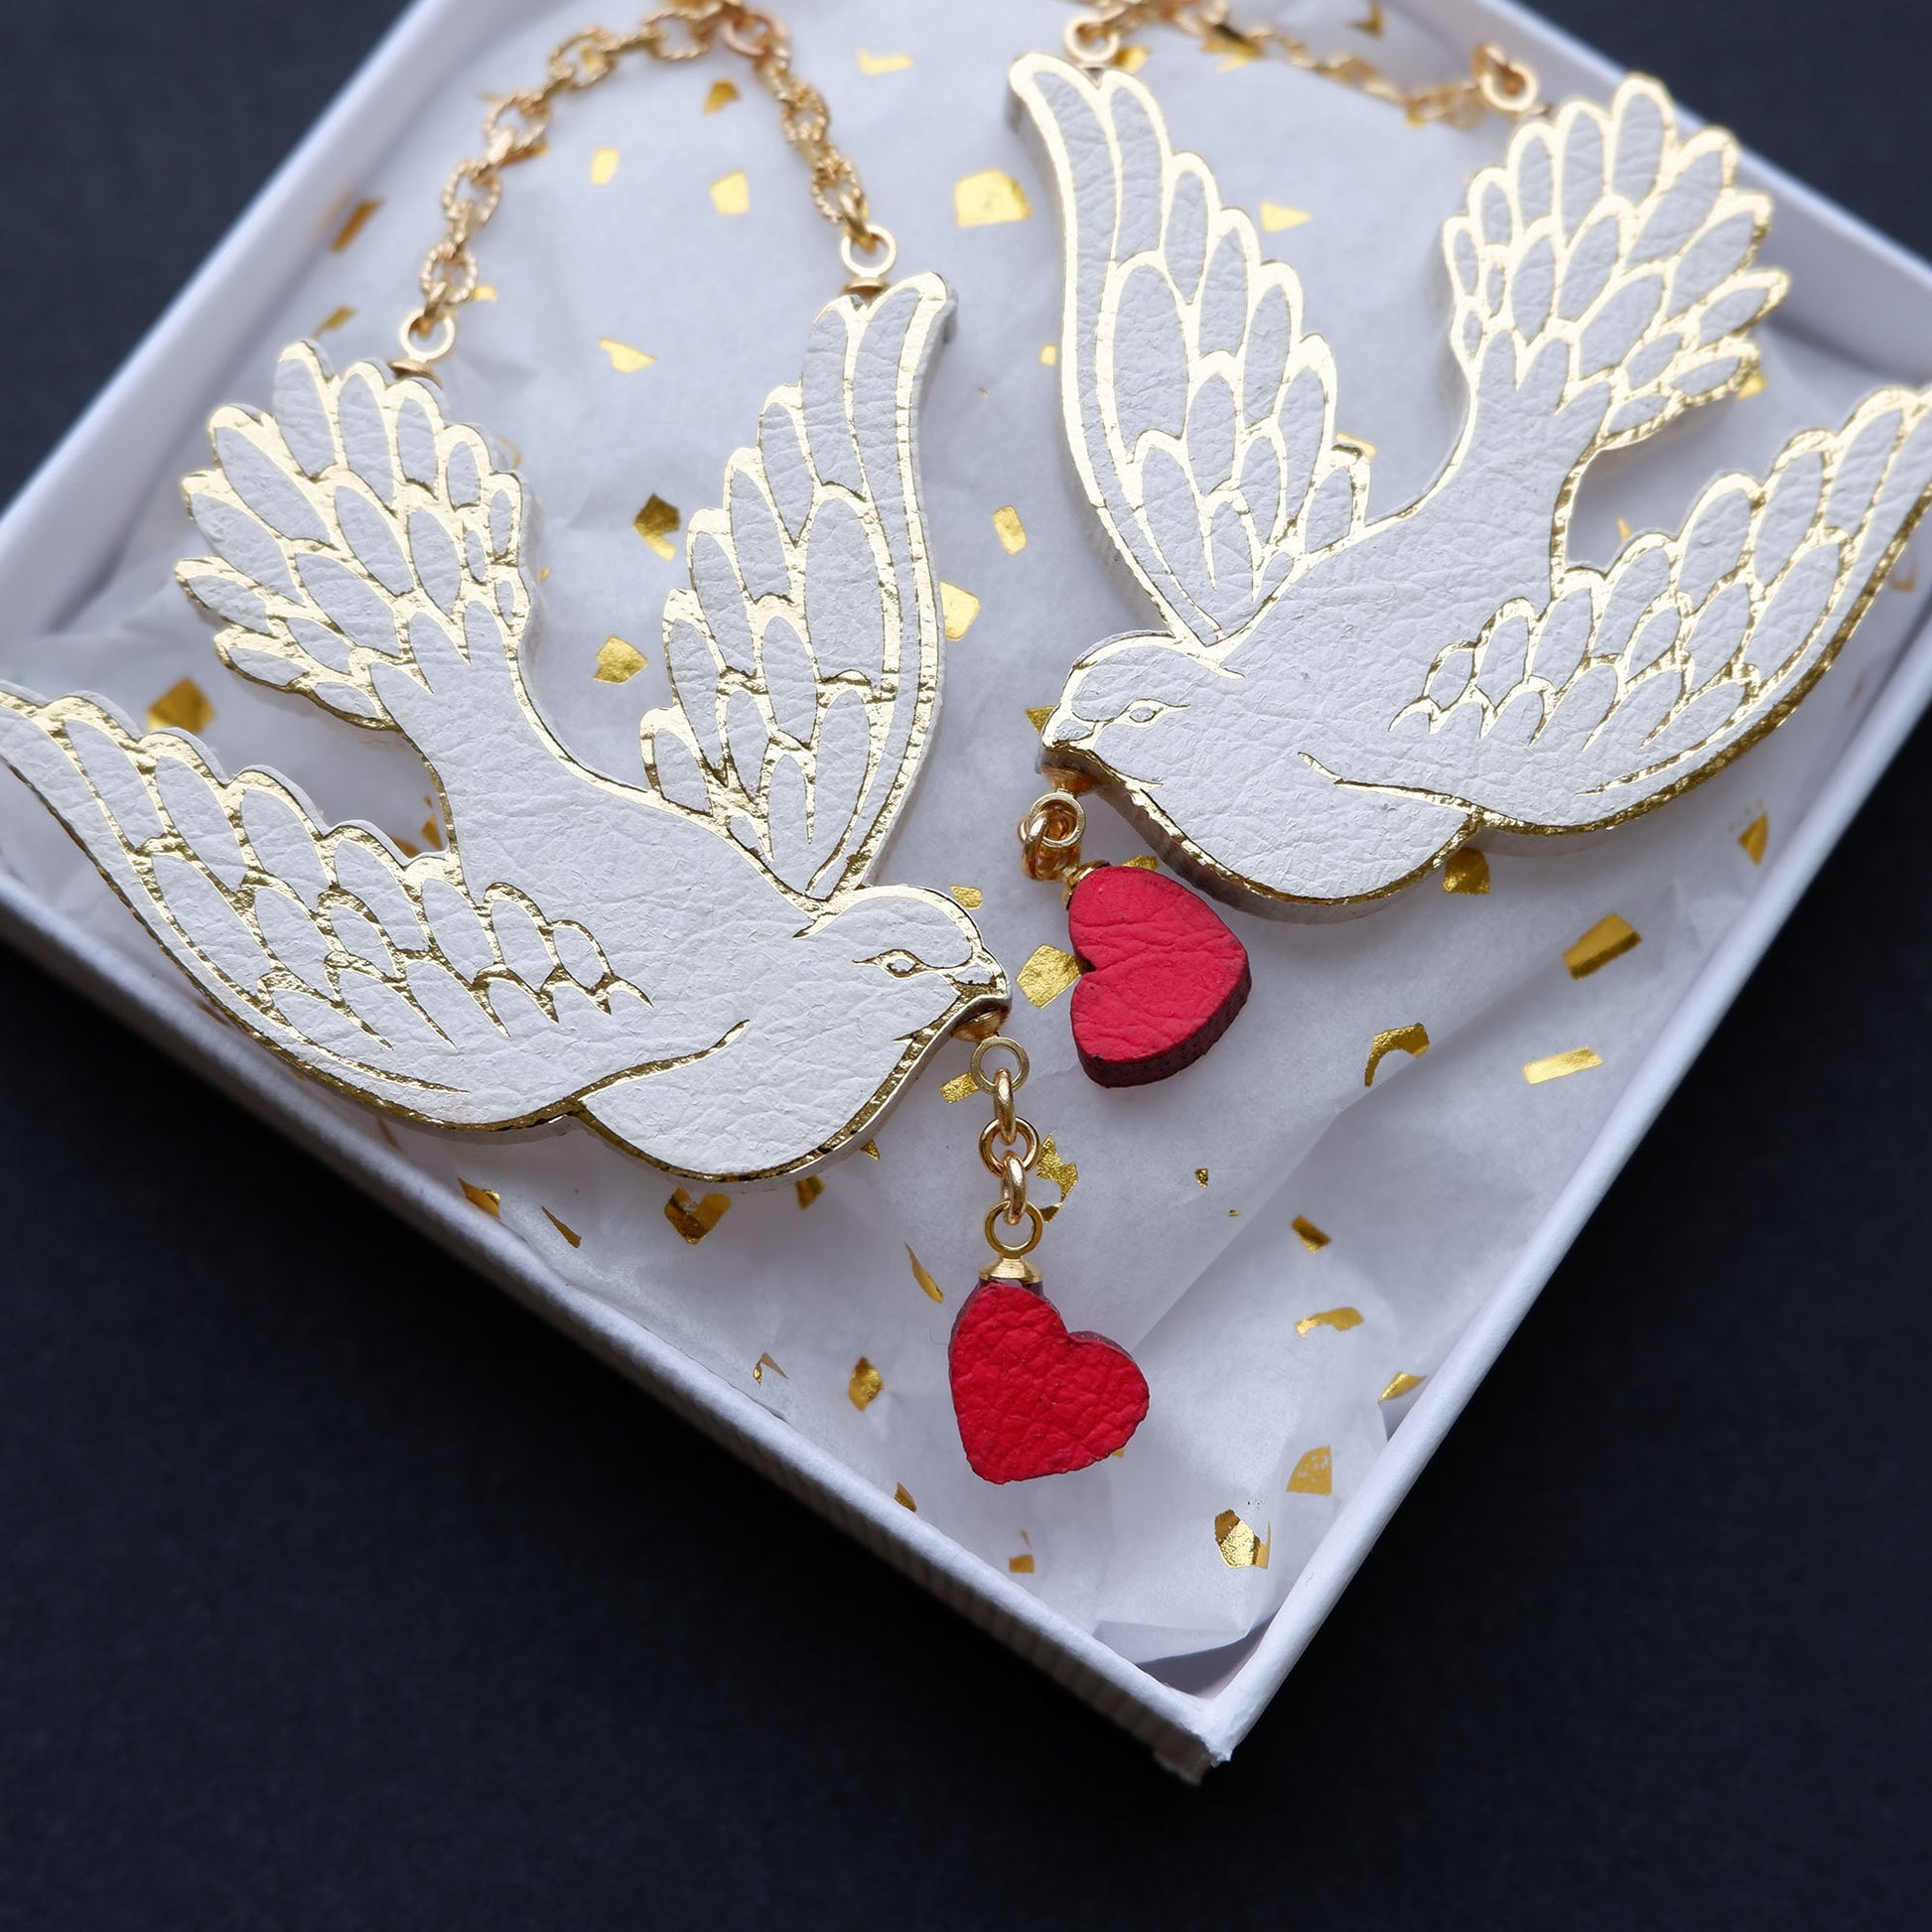 white dove earrings carrying small red hearts from their beaks.